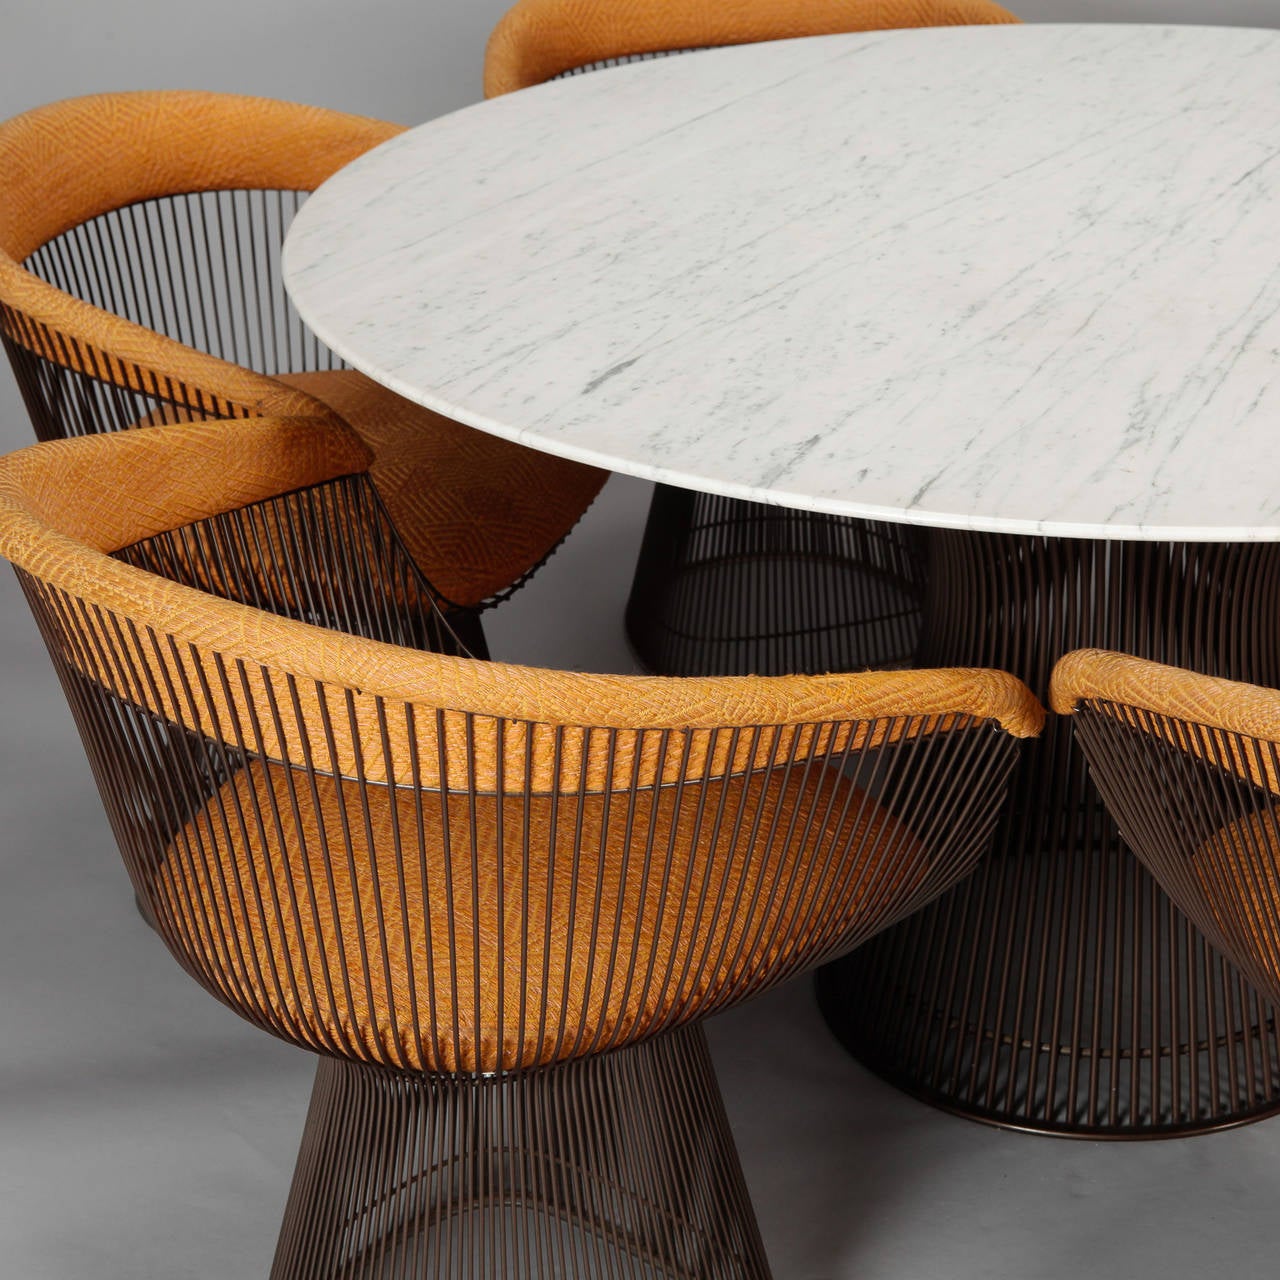 Circa 1960s Knoll dining table with six chairs set designed by Warren Platner.  54” diameter table has beveled edge Italian carrarra marble top and bronze finish metal base. Six coordinating chairs with bronze finish and original gold jacquard